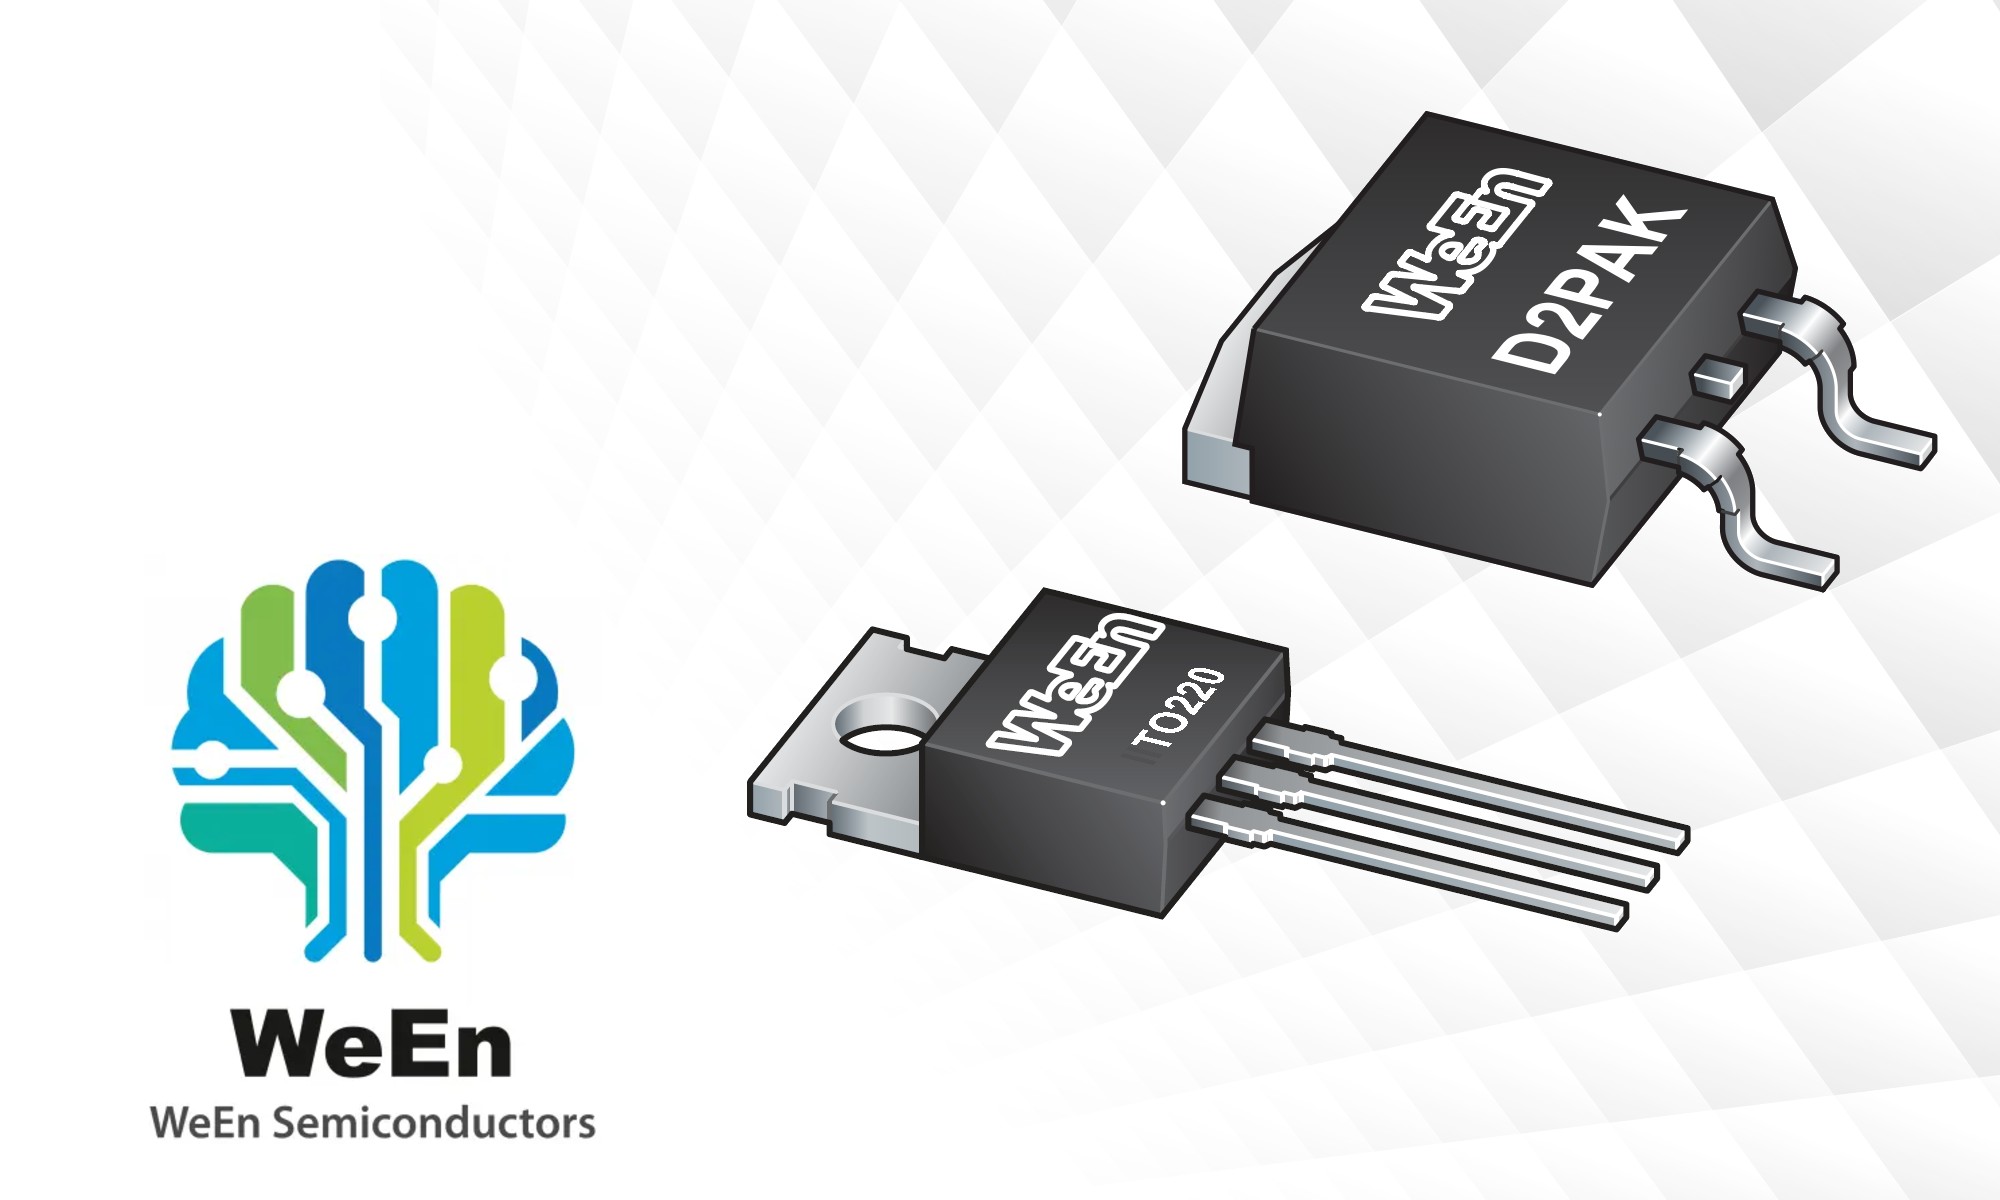 Dual power Schottky diodes by WeEn Semiconductors